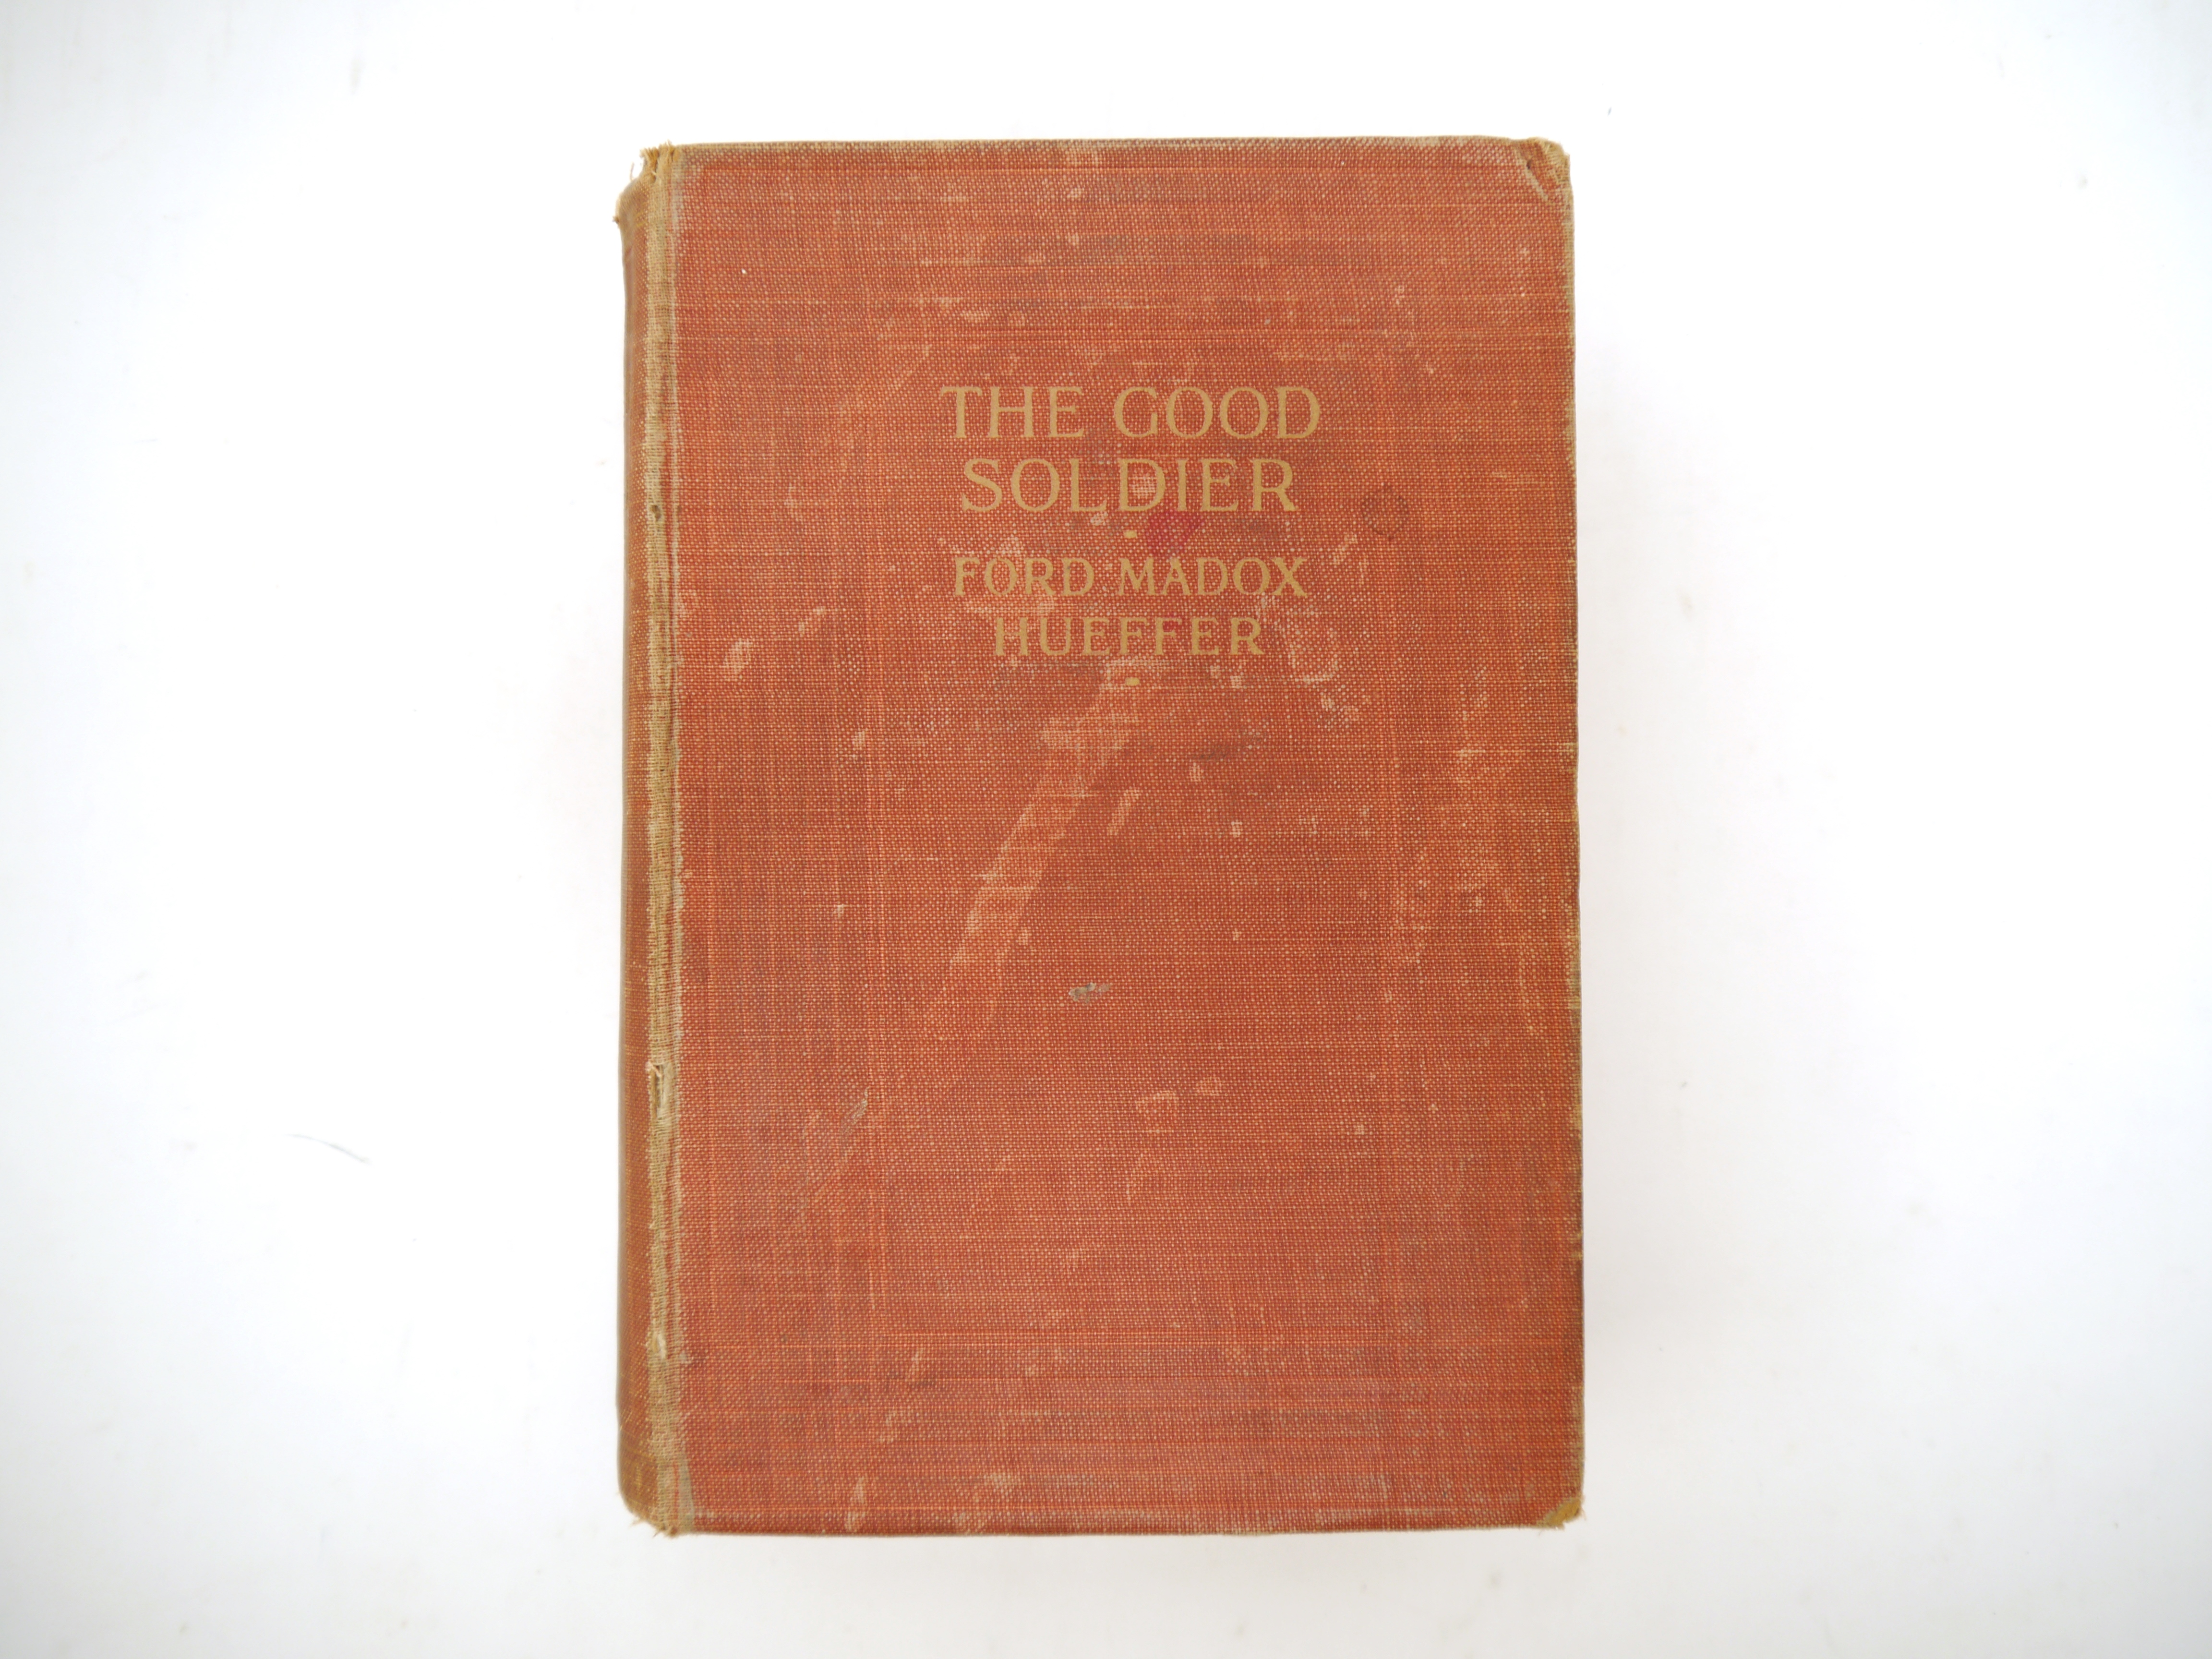 Ford Madox Ford (as Ford Madox Hueffer): 'The Good Soldier: A Tale of Passion', London, John Lane